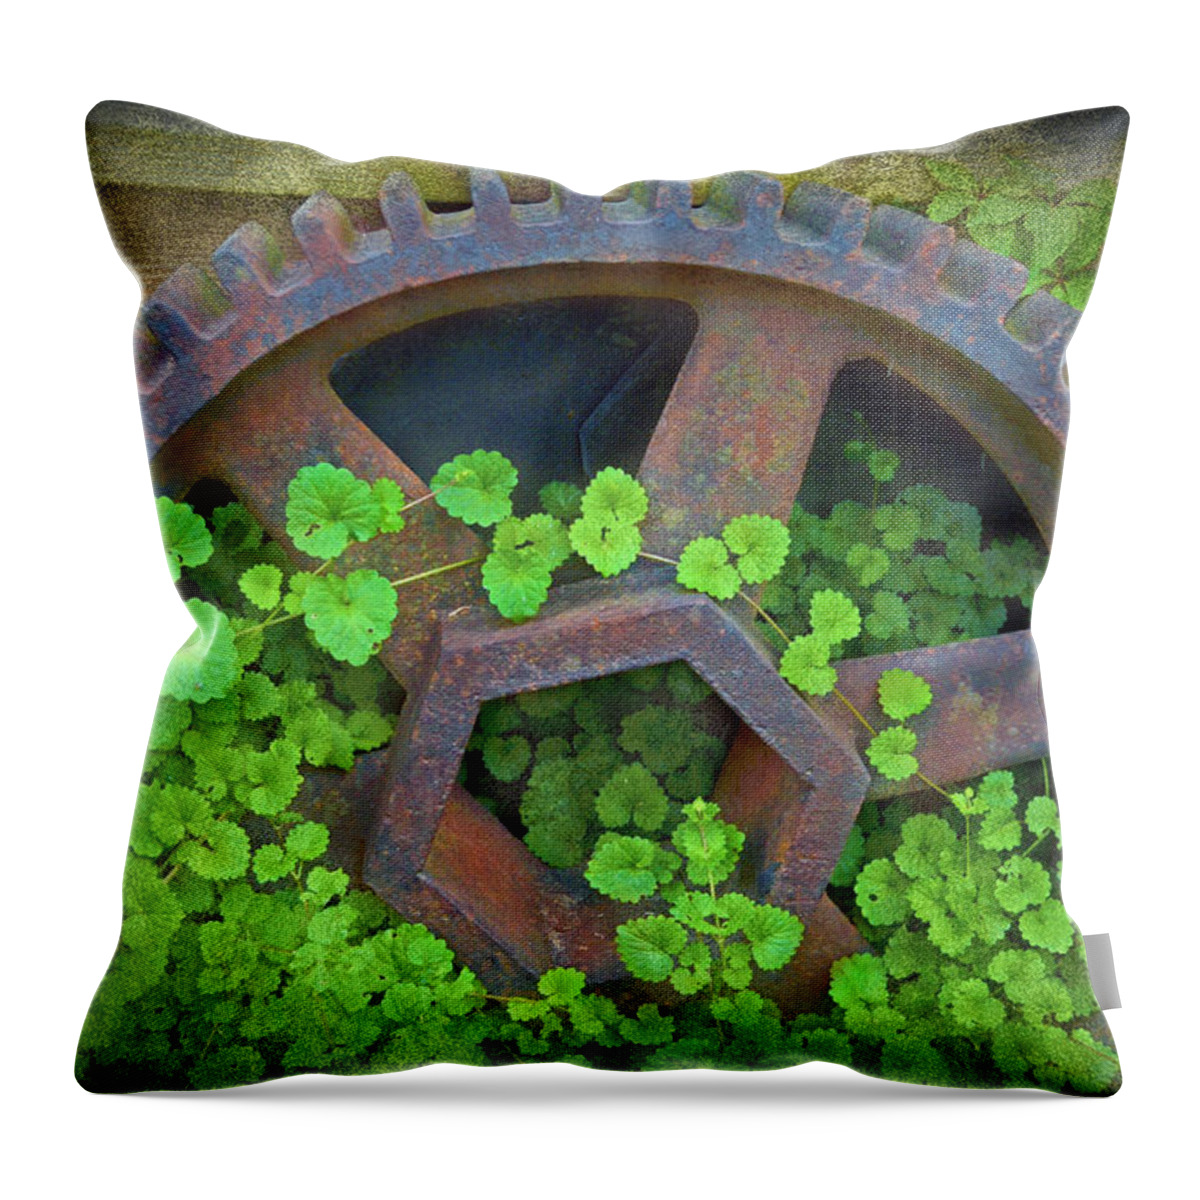 Old Mill Of Guilford Grinding Gear Throw Pillow featuring the photograph Old Mill of Guiford Grinding Gear by Sandi OReilly